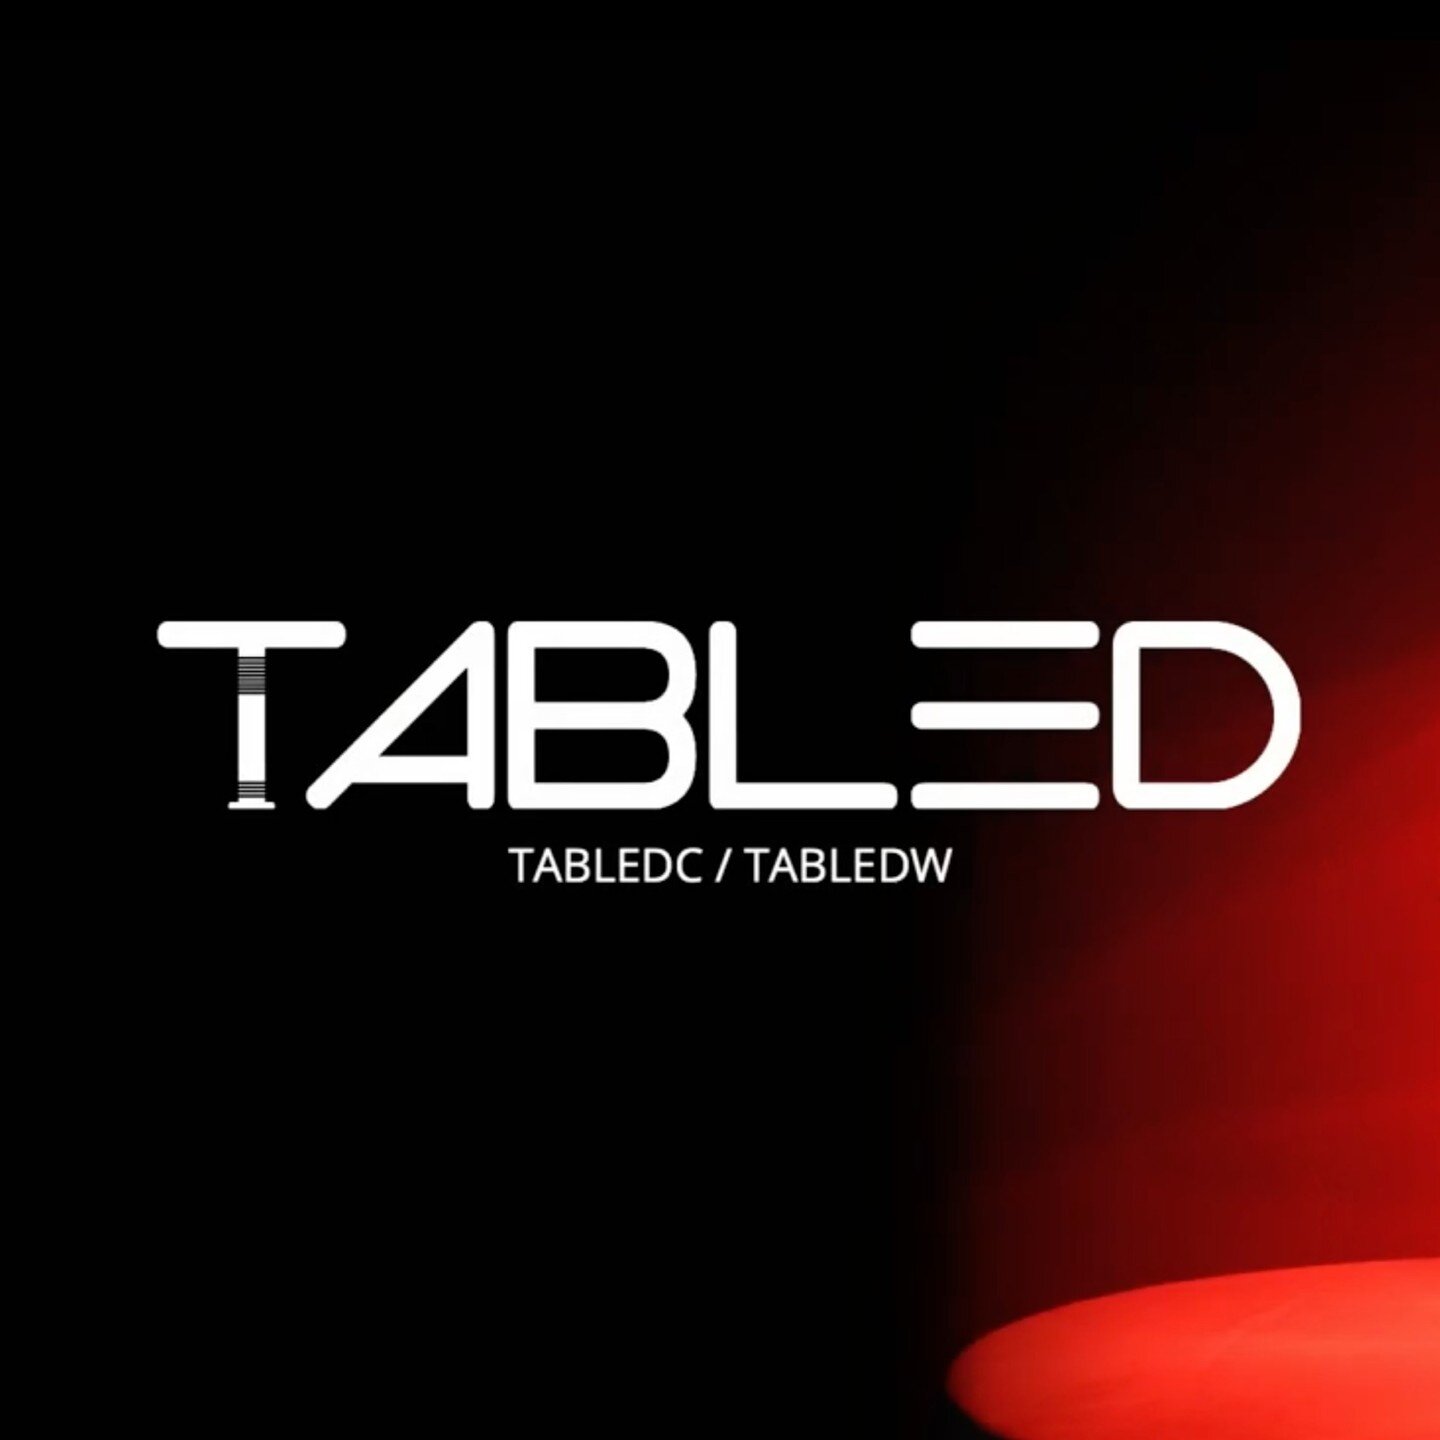 Now Available for Hire - Revolutionary full colour event battery table lamp. Tabled C is an ingenious product which offers beautiful table lighting for events whilst keeping the atmosphere of the room. 

Read more.

www.avc.ie/recent-projects/now-ava